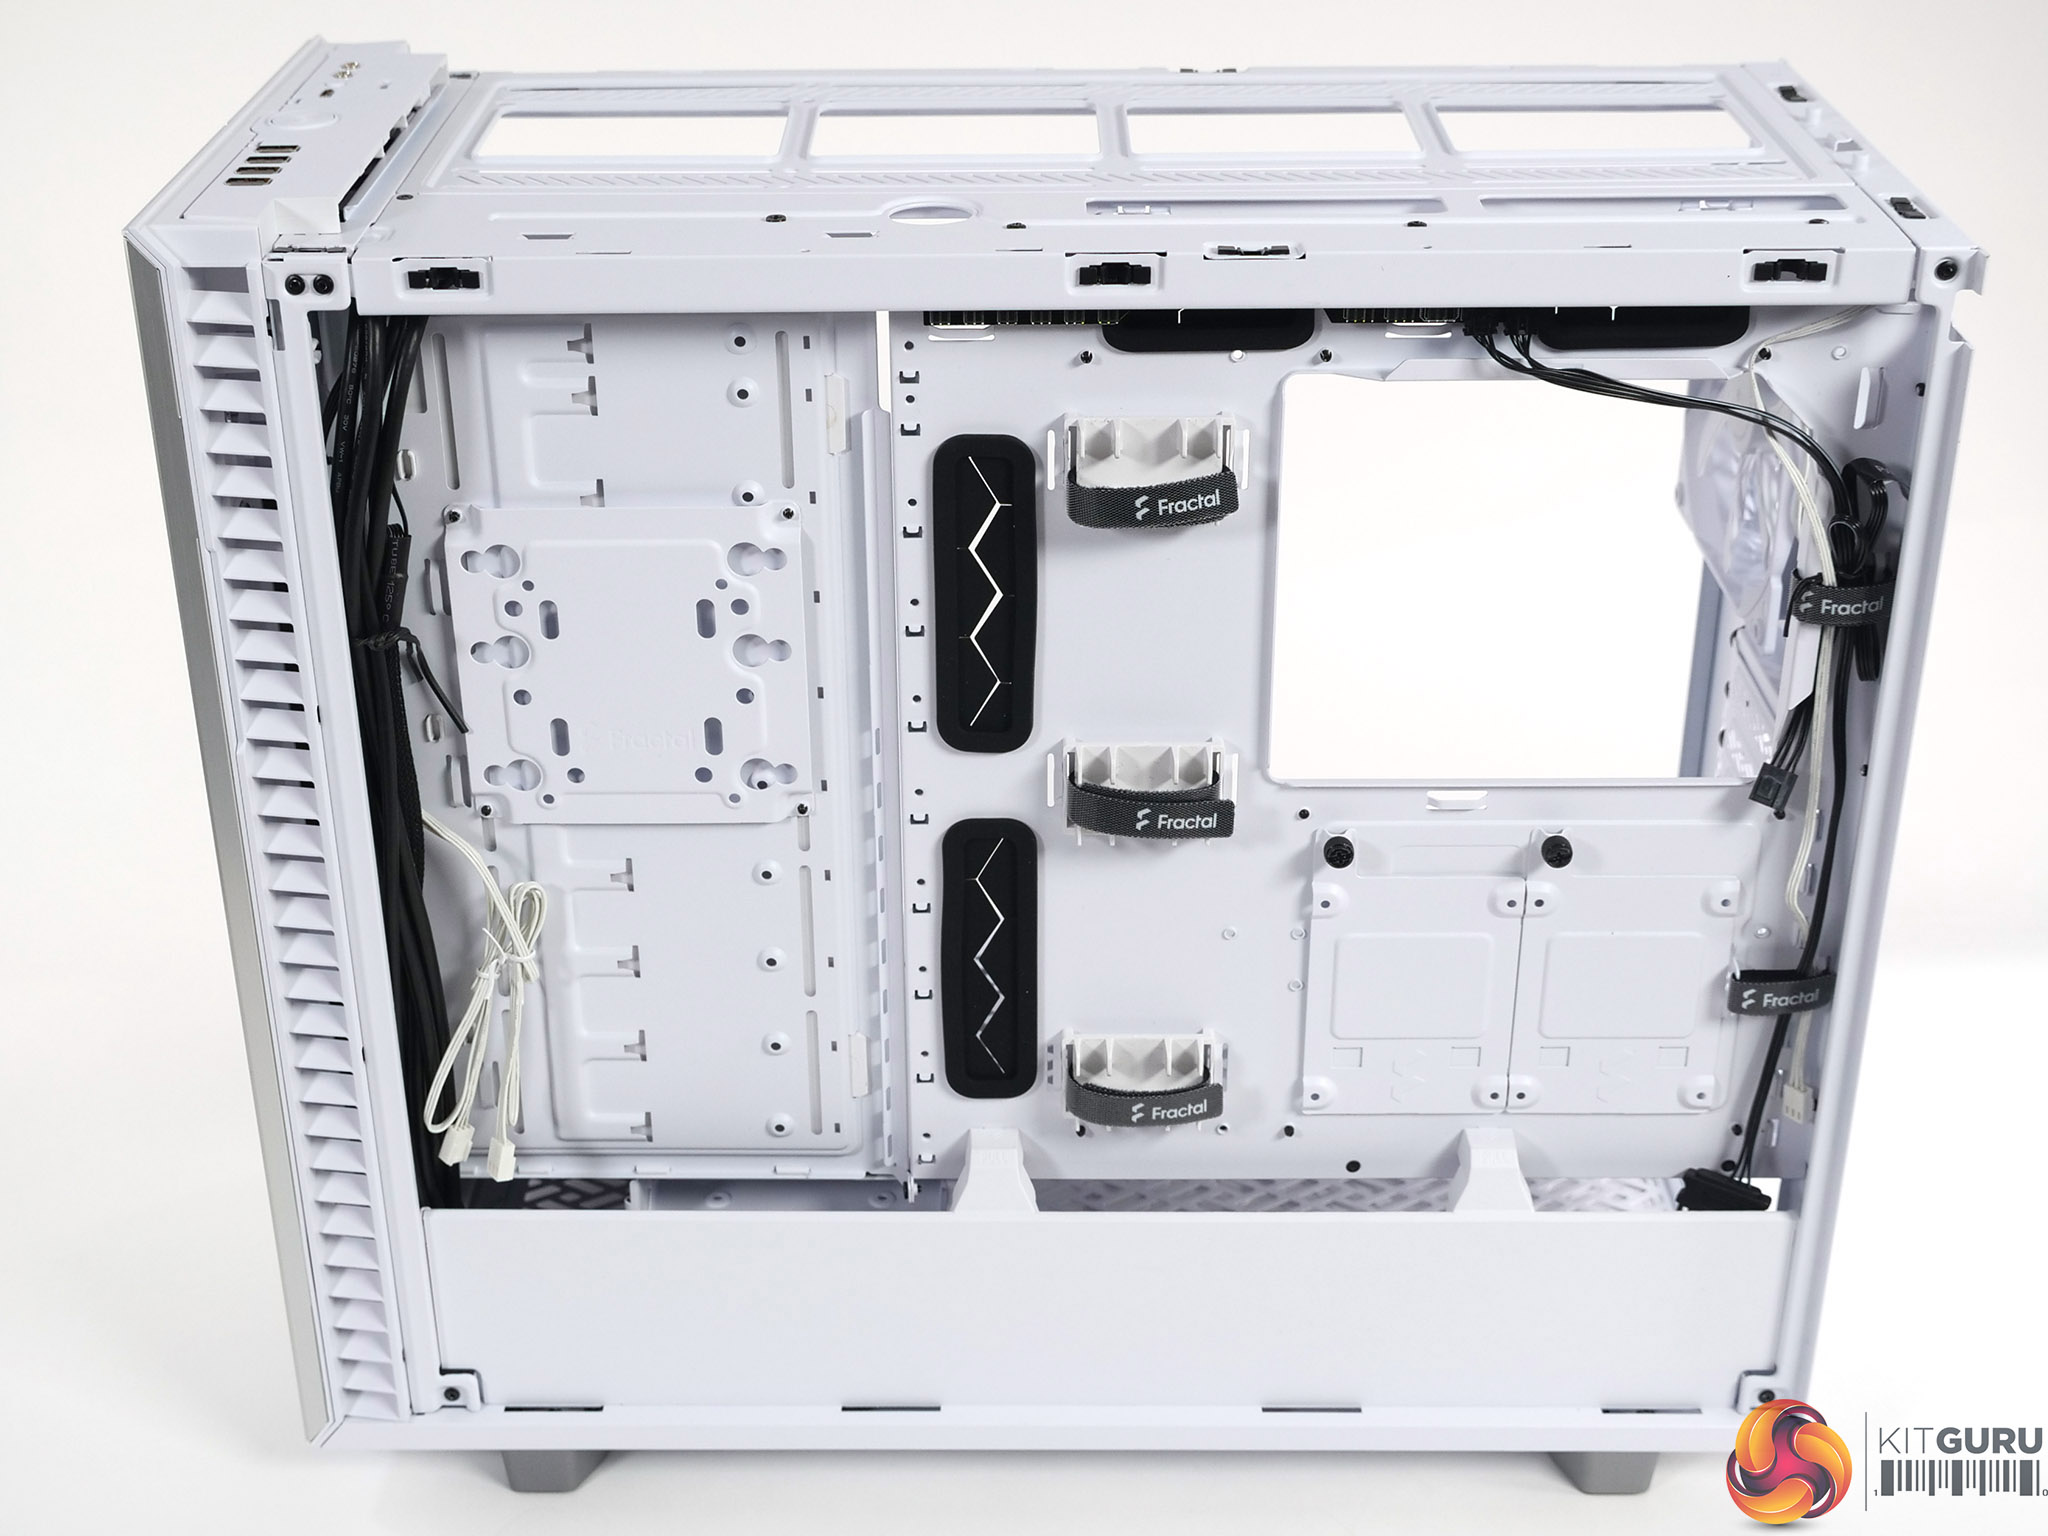 Define 7 and 7 XL from Fractal Design Launch, Refining the R6